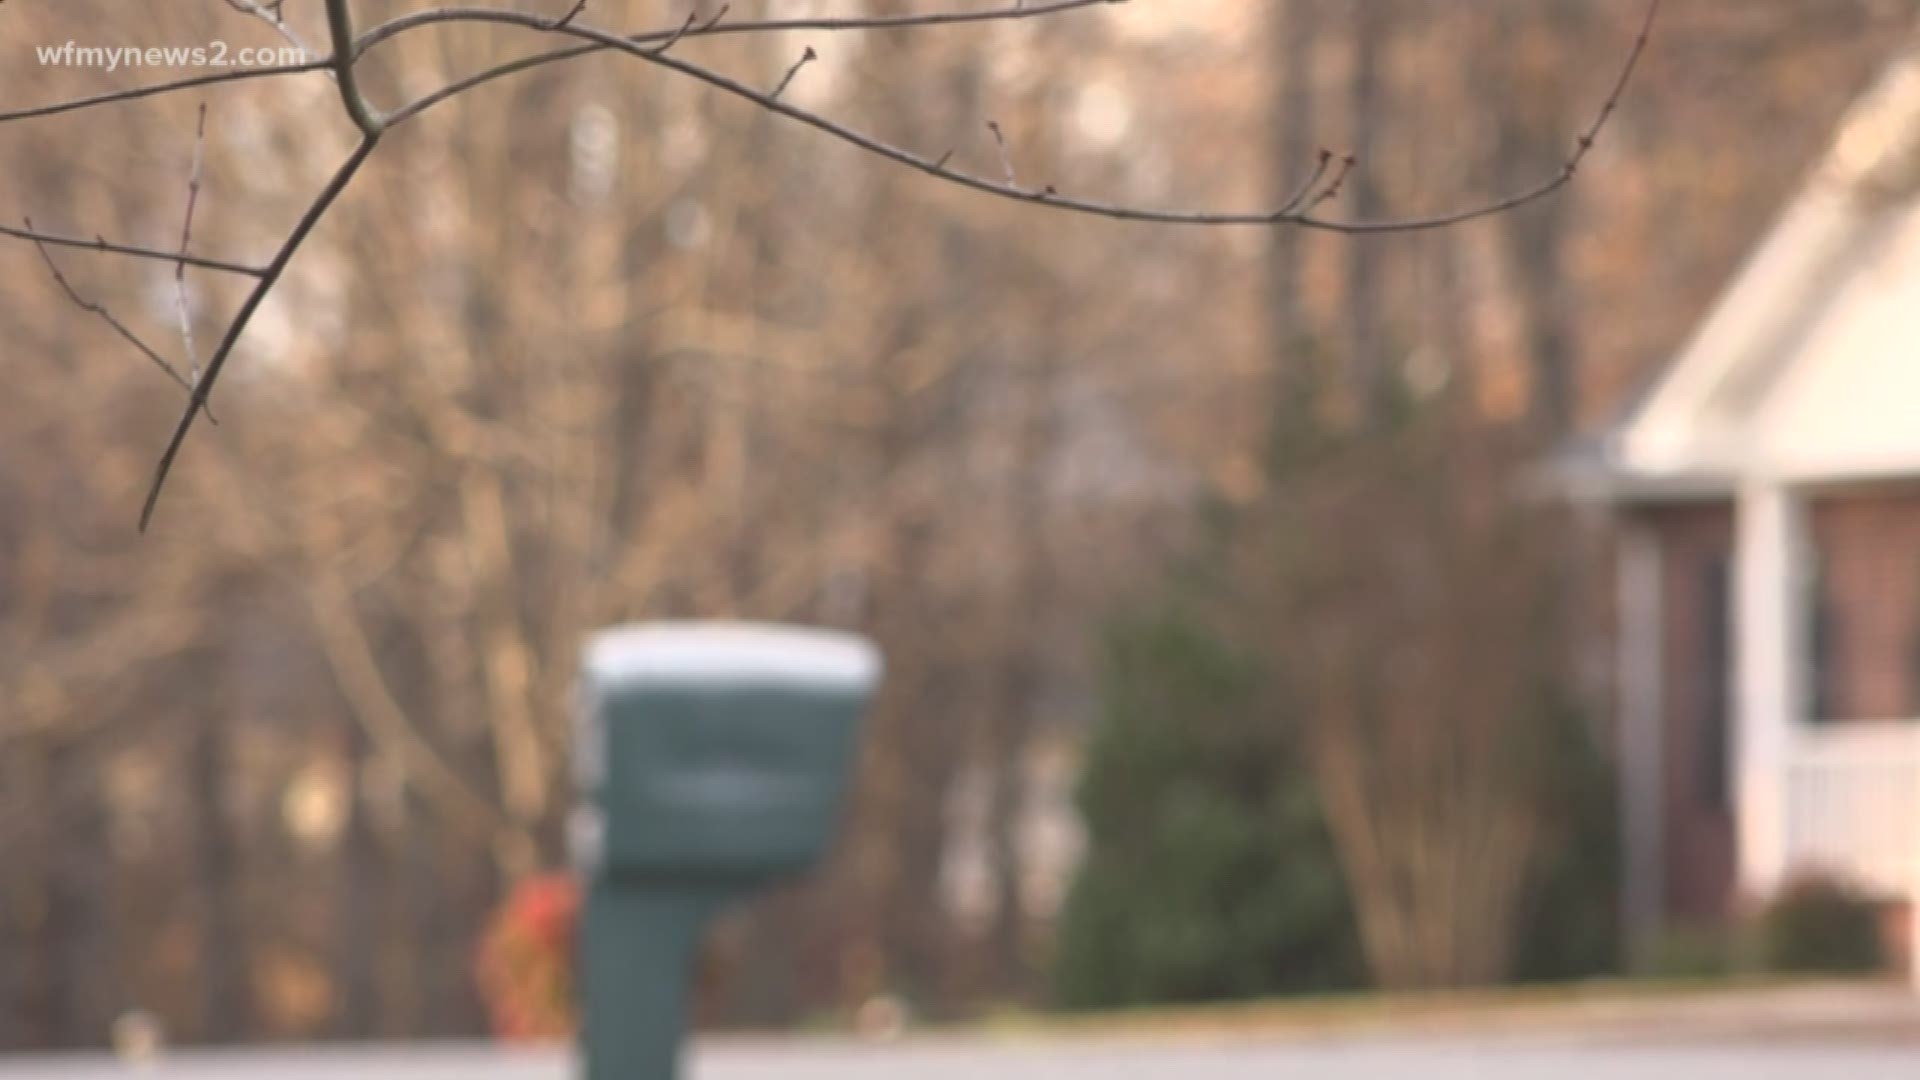 Heather Heath’s home has been a hot spot for deliveries. Problem is, they aren’t hers. In the middle of porch pirate season, Heather is doing the right thing.